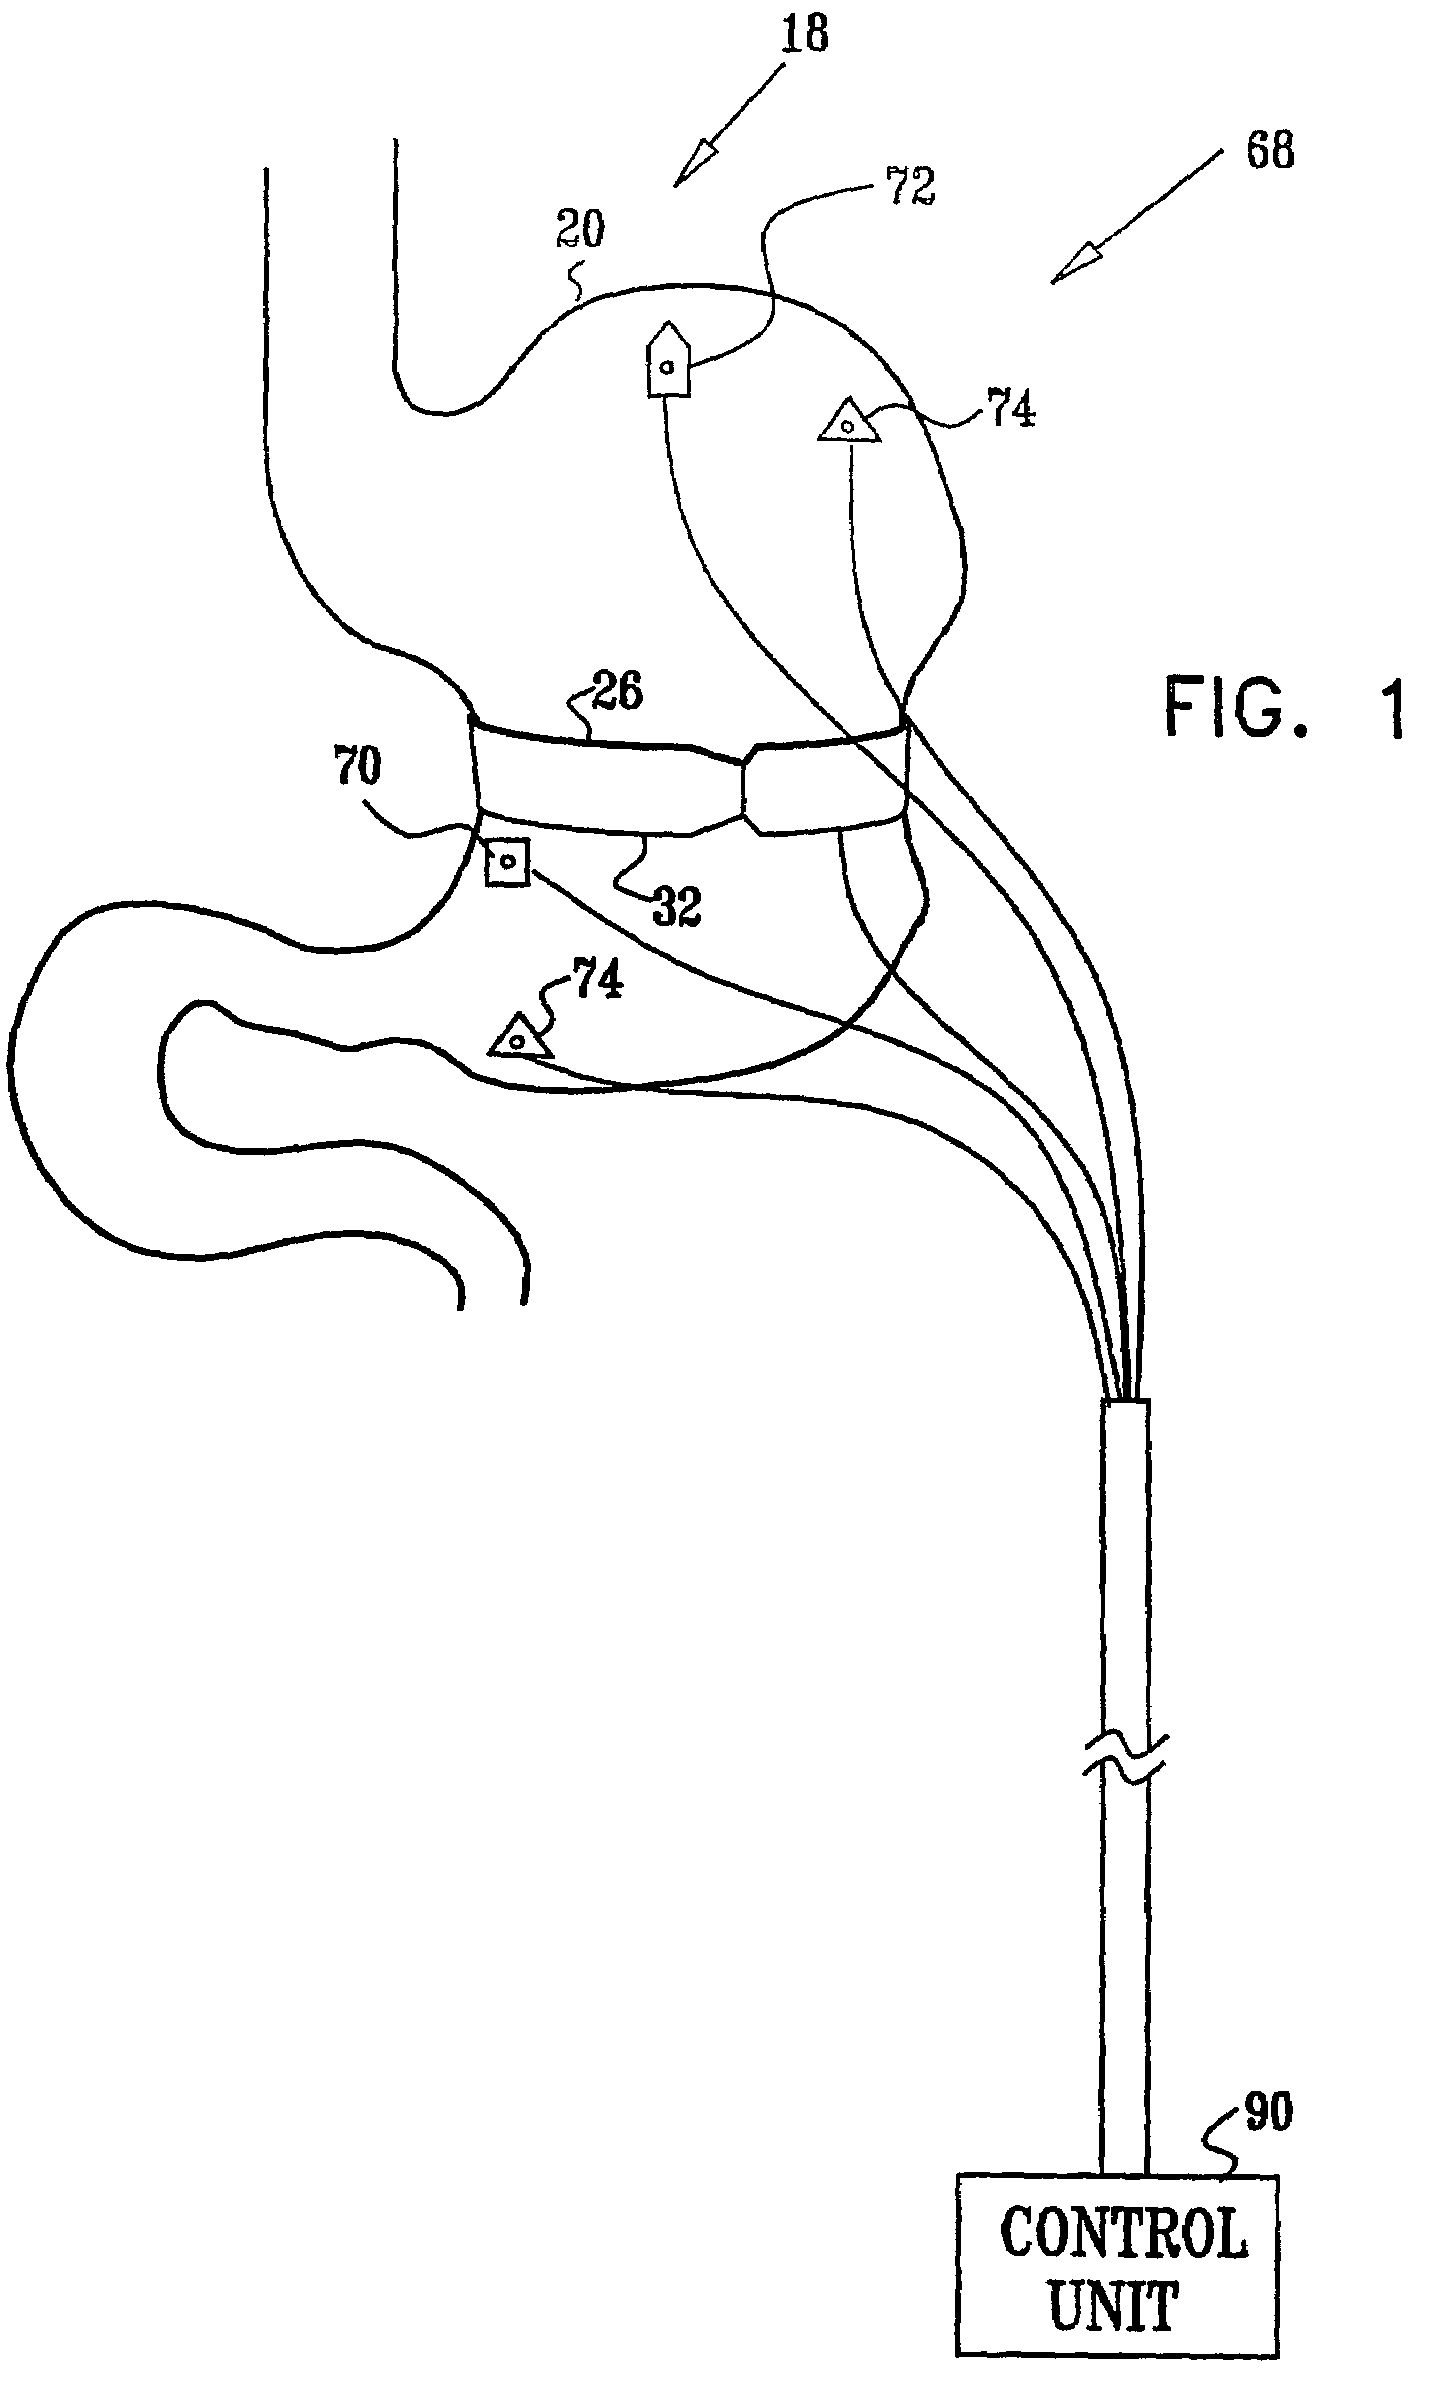 Gastrointestinal methods and apparatus for use in treating disorders